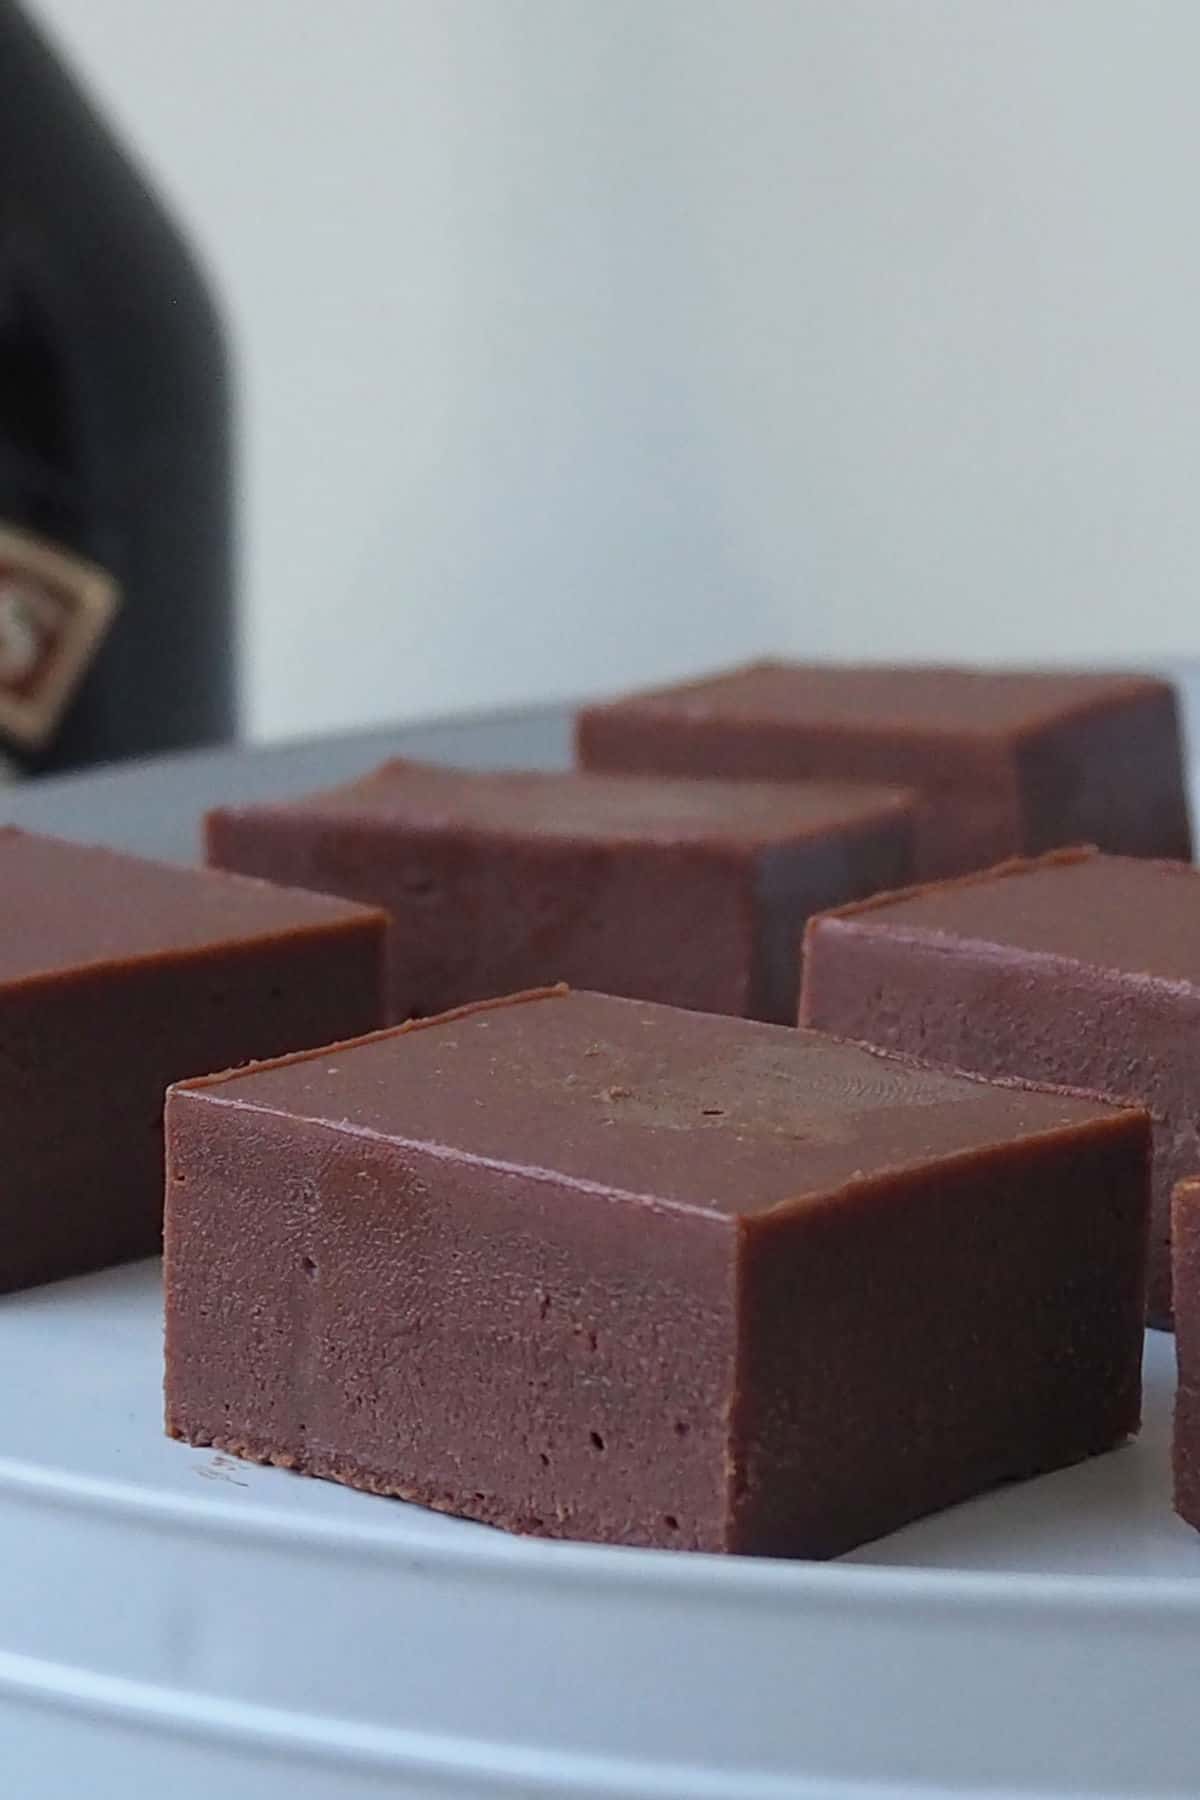 Slices of Baileys Fudge sitting on a white serving stand with a bottle of Baileys in the background.